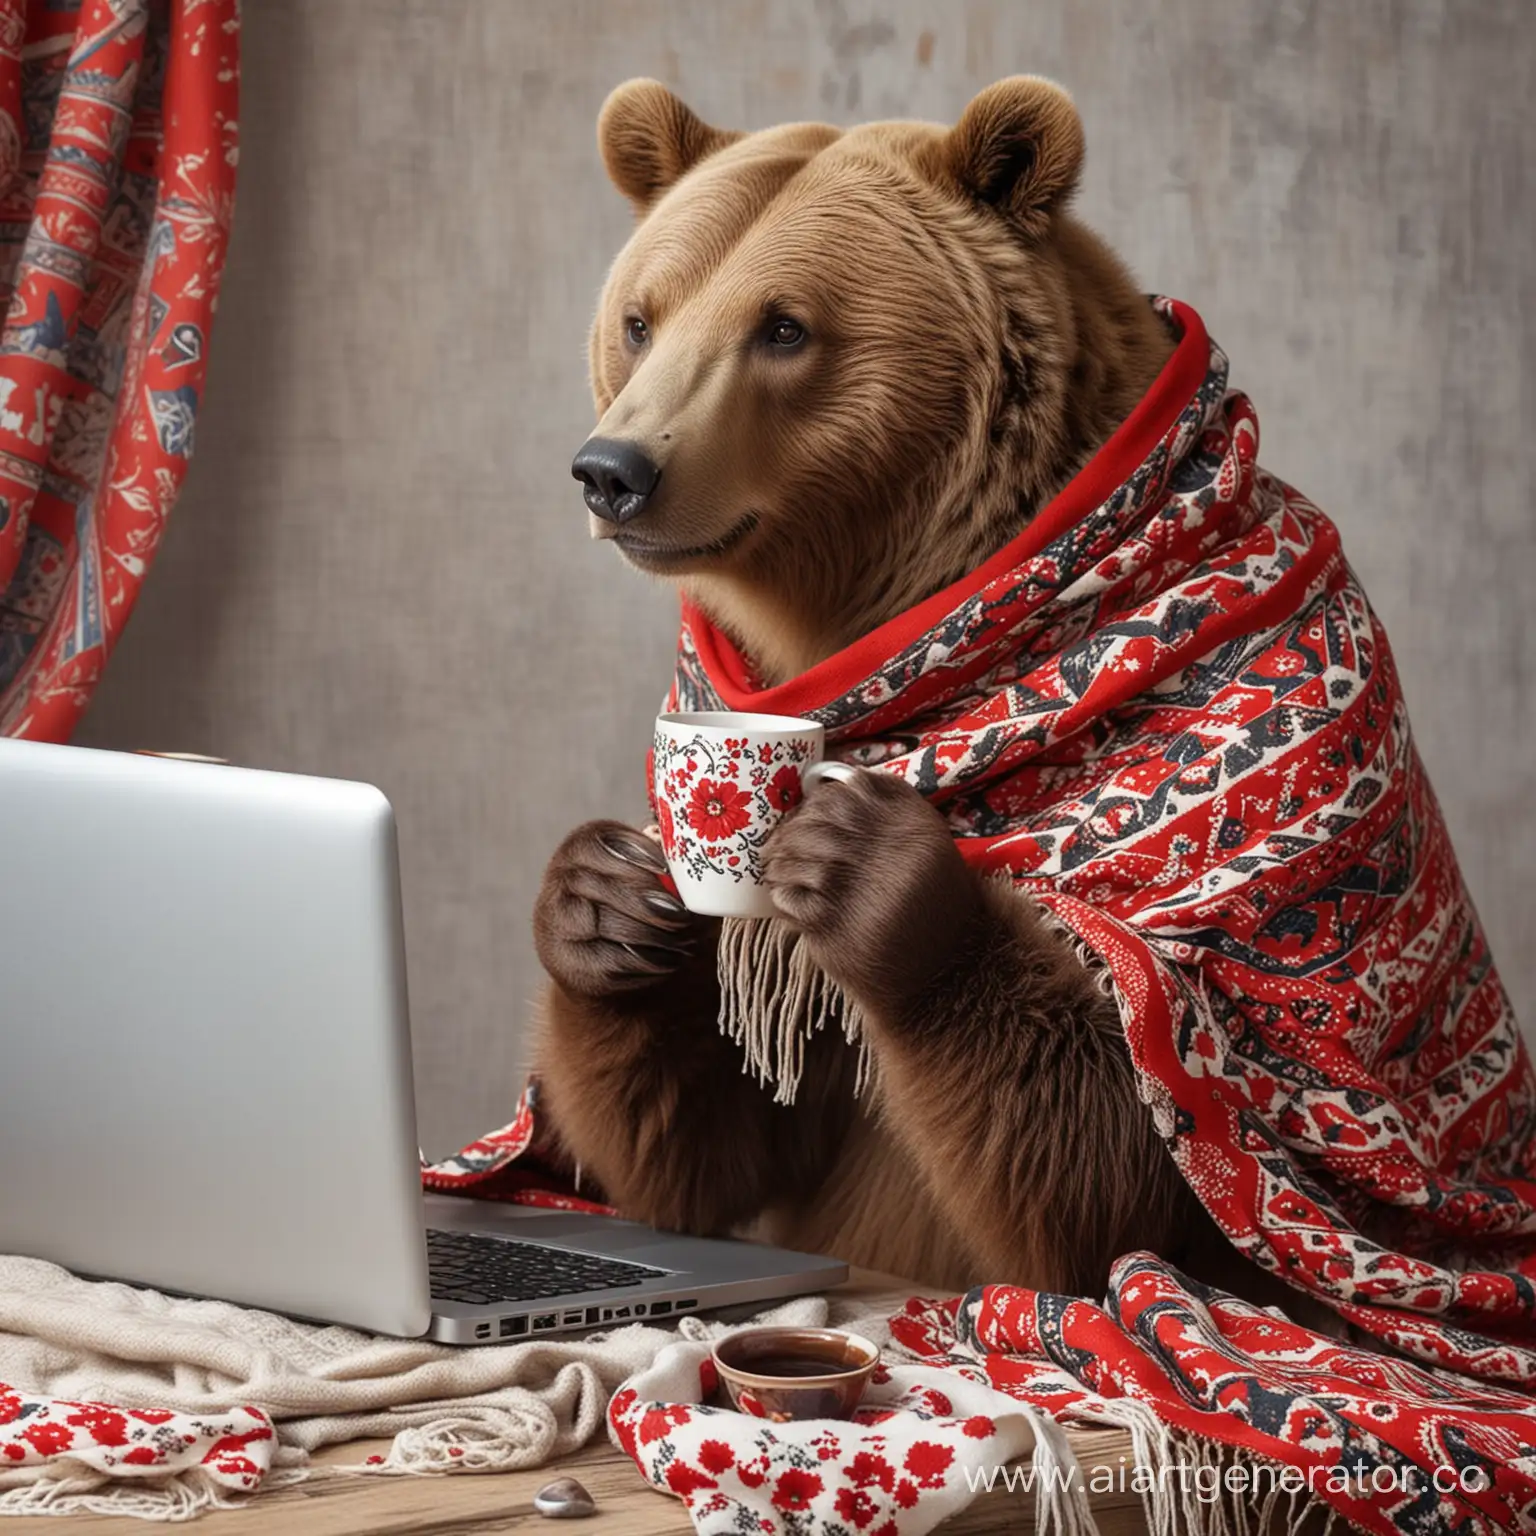 Russian-Scarfed-Bear-Working-on-Computer-with-Tea